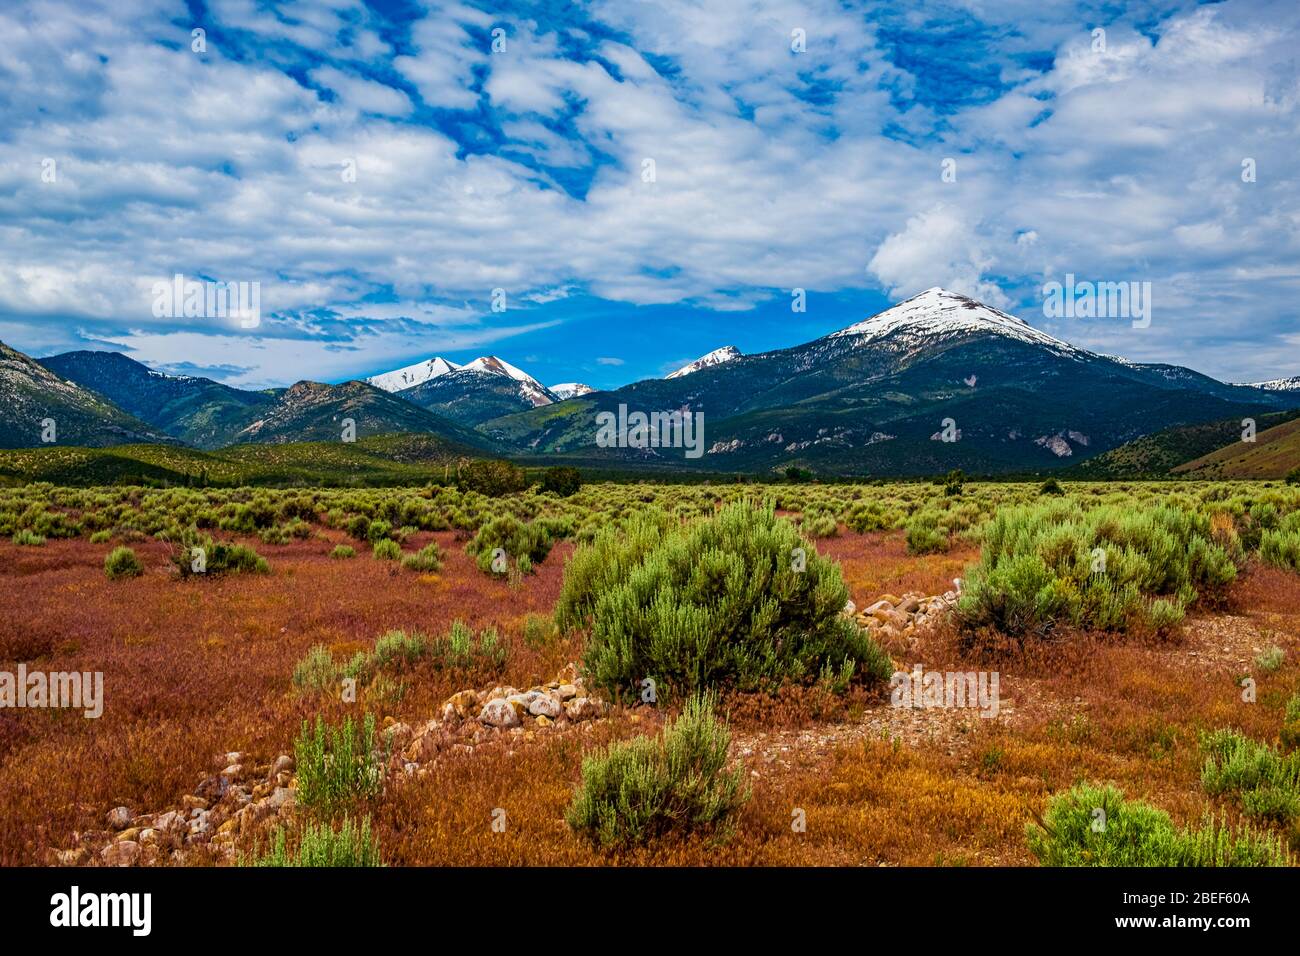 Majestic Wheeler Peak rises in the distance as viewed from a colorful spring meadow at Great Basin National Park - Nevada Stock Photo